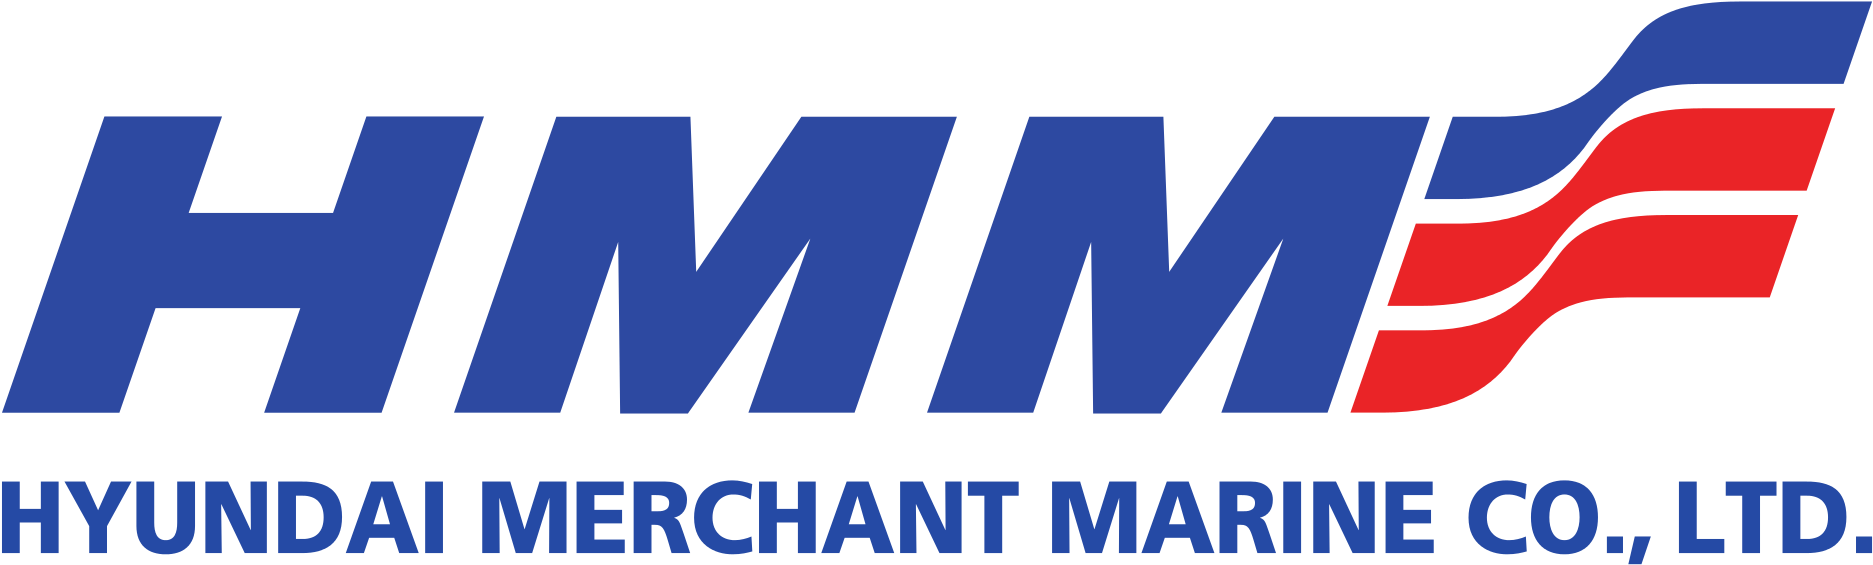 Know Current Status Of Your Hyundai Merchant Marine - Oval (2000x628)